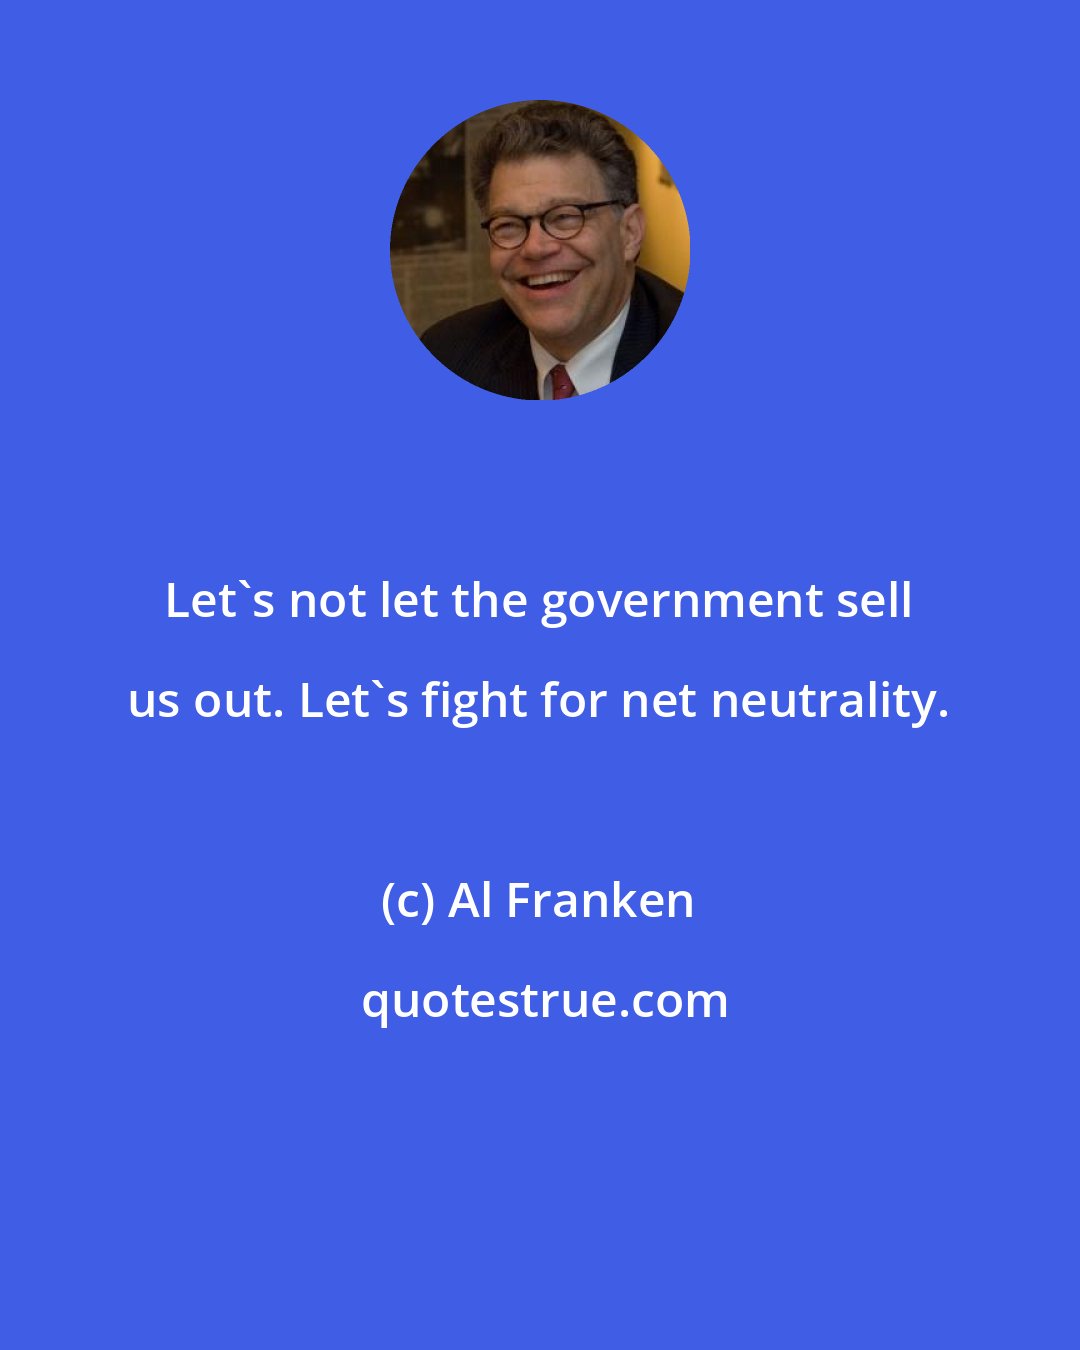 Al Franken: Let's not let the government sell us out. Let's fight for net neutrality.